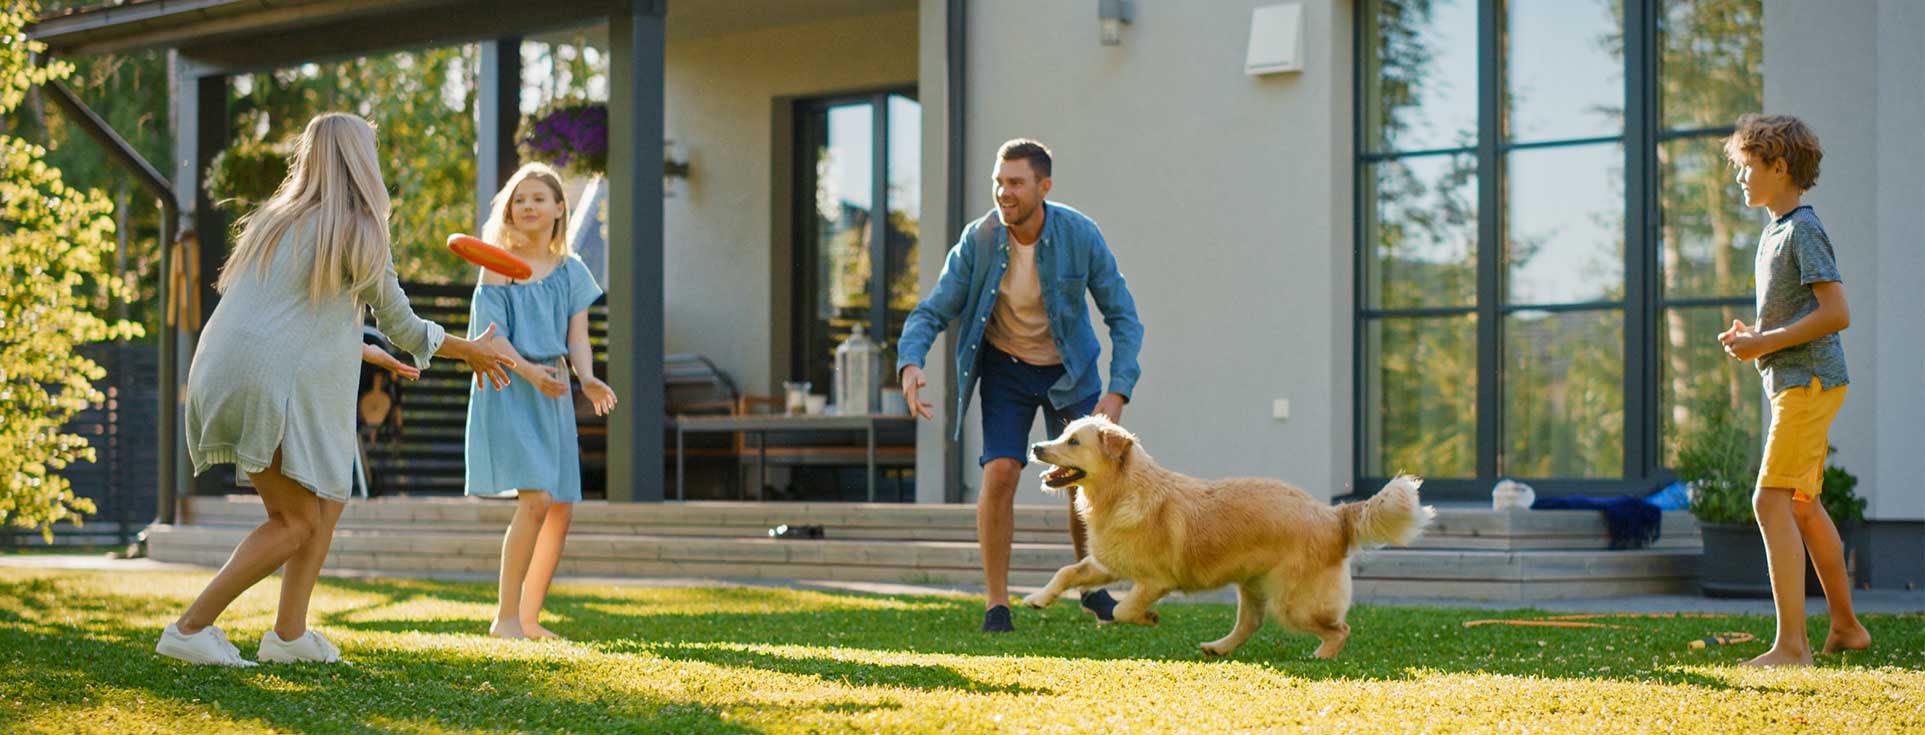 Family playing frisbee in yard with their dog